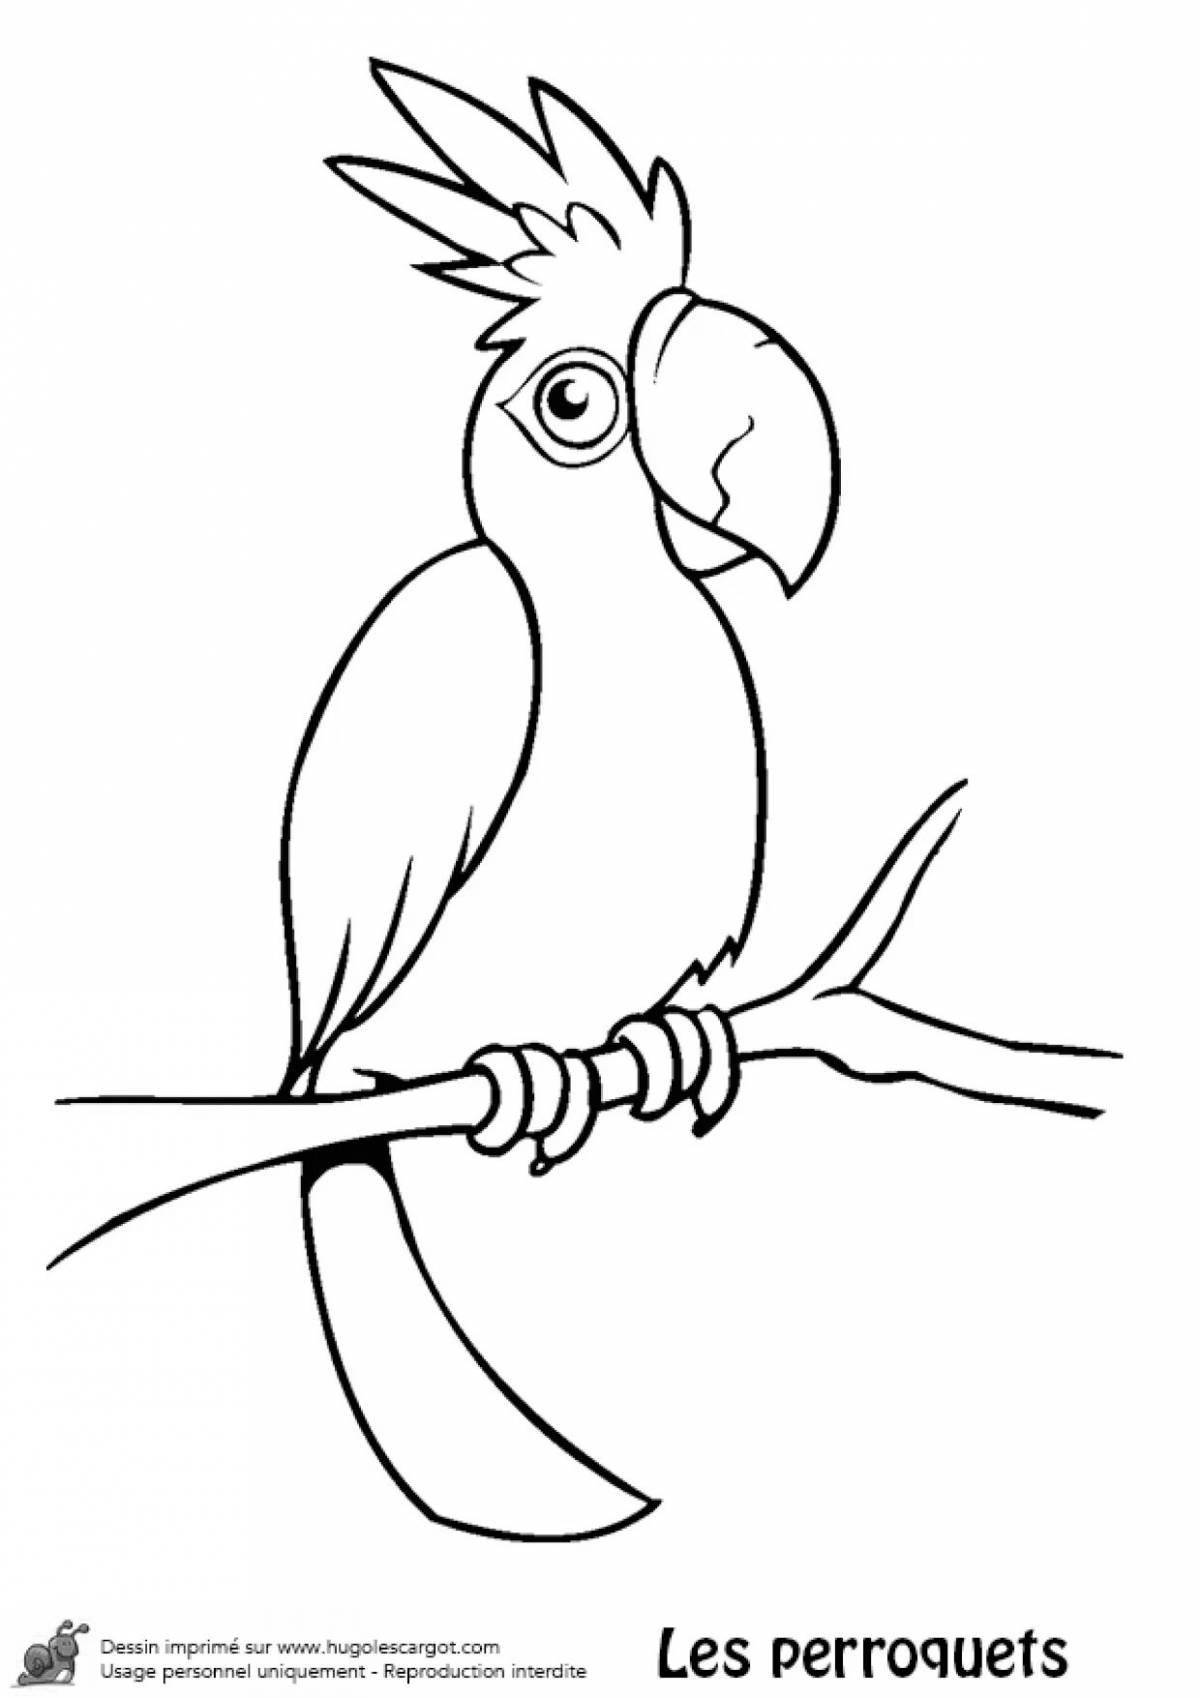 Intriguing parrot coloring book for 3-4 year olds